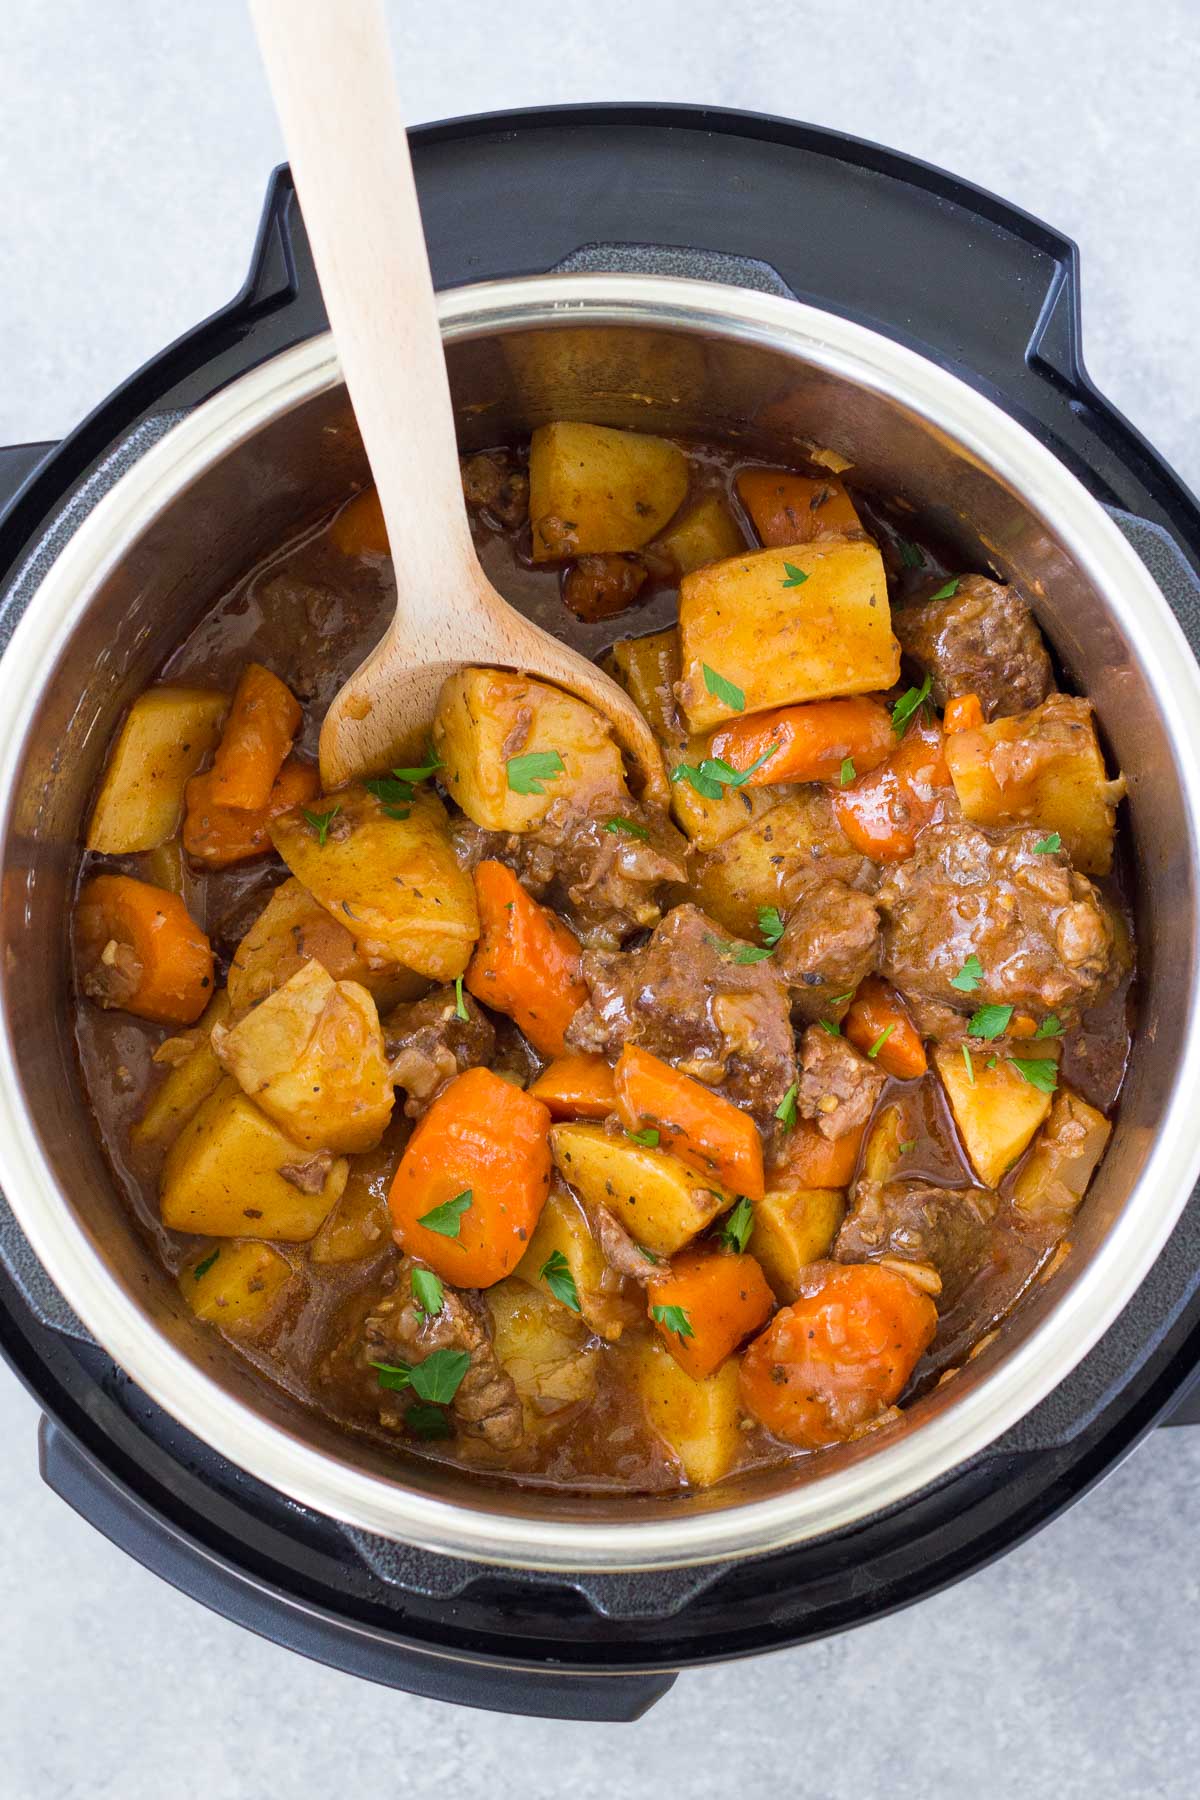 Beef stew after thickening in an Instant Pot.